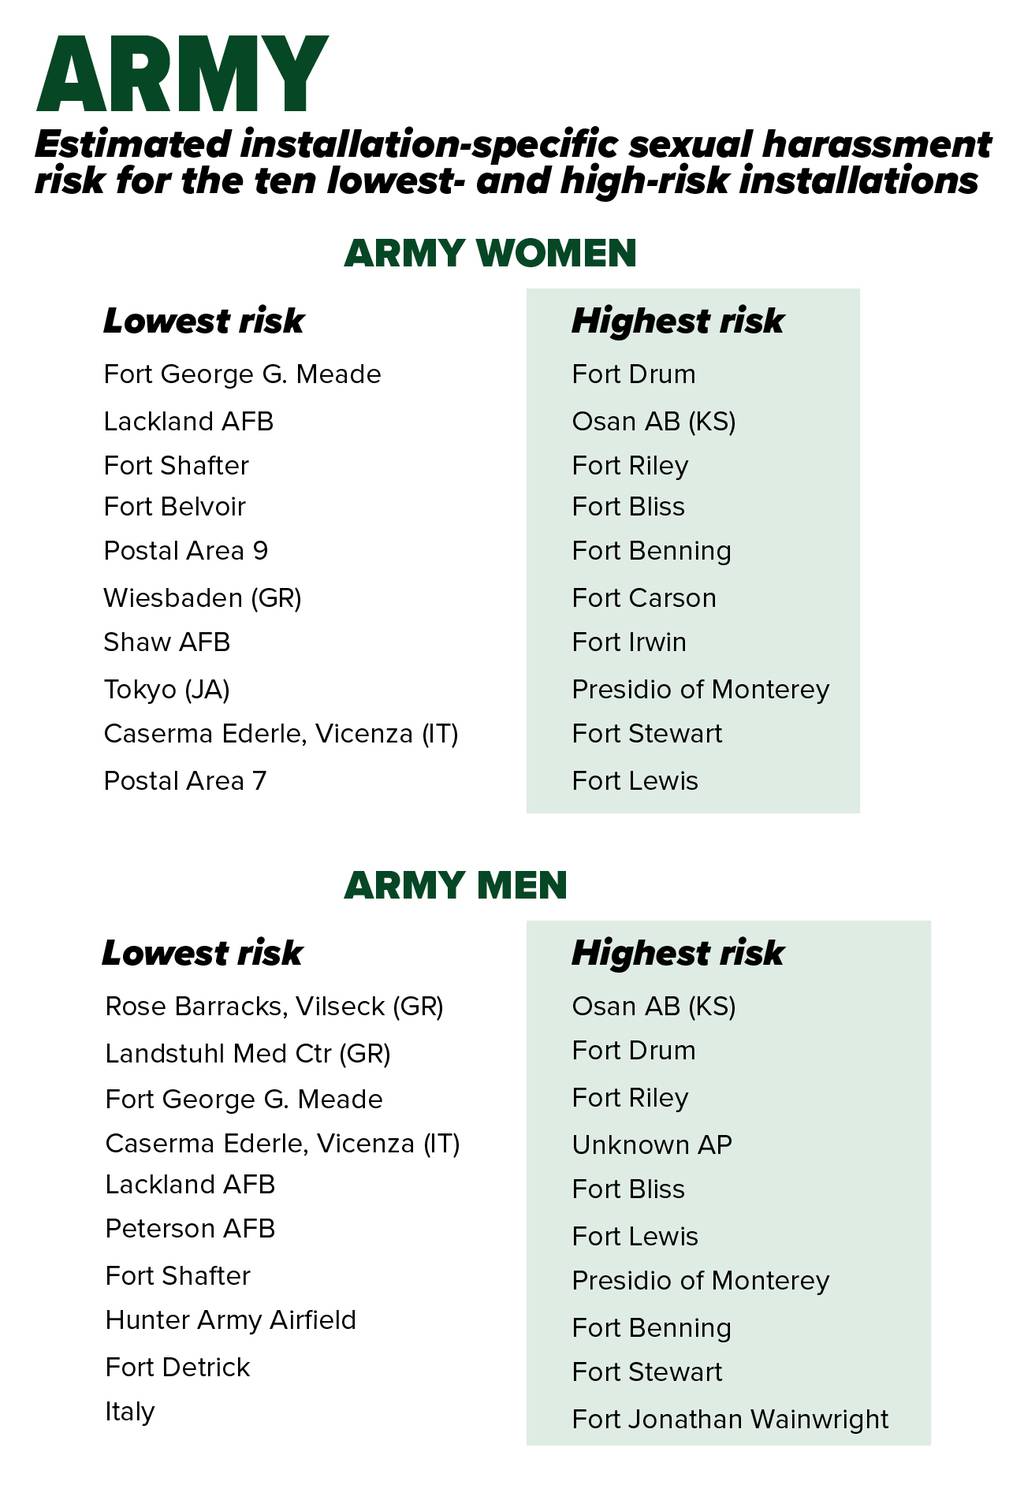 Top 10 List Of Army Commands Where Soldiers Are At Most Risk Of Sexual